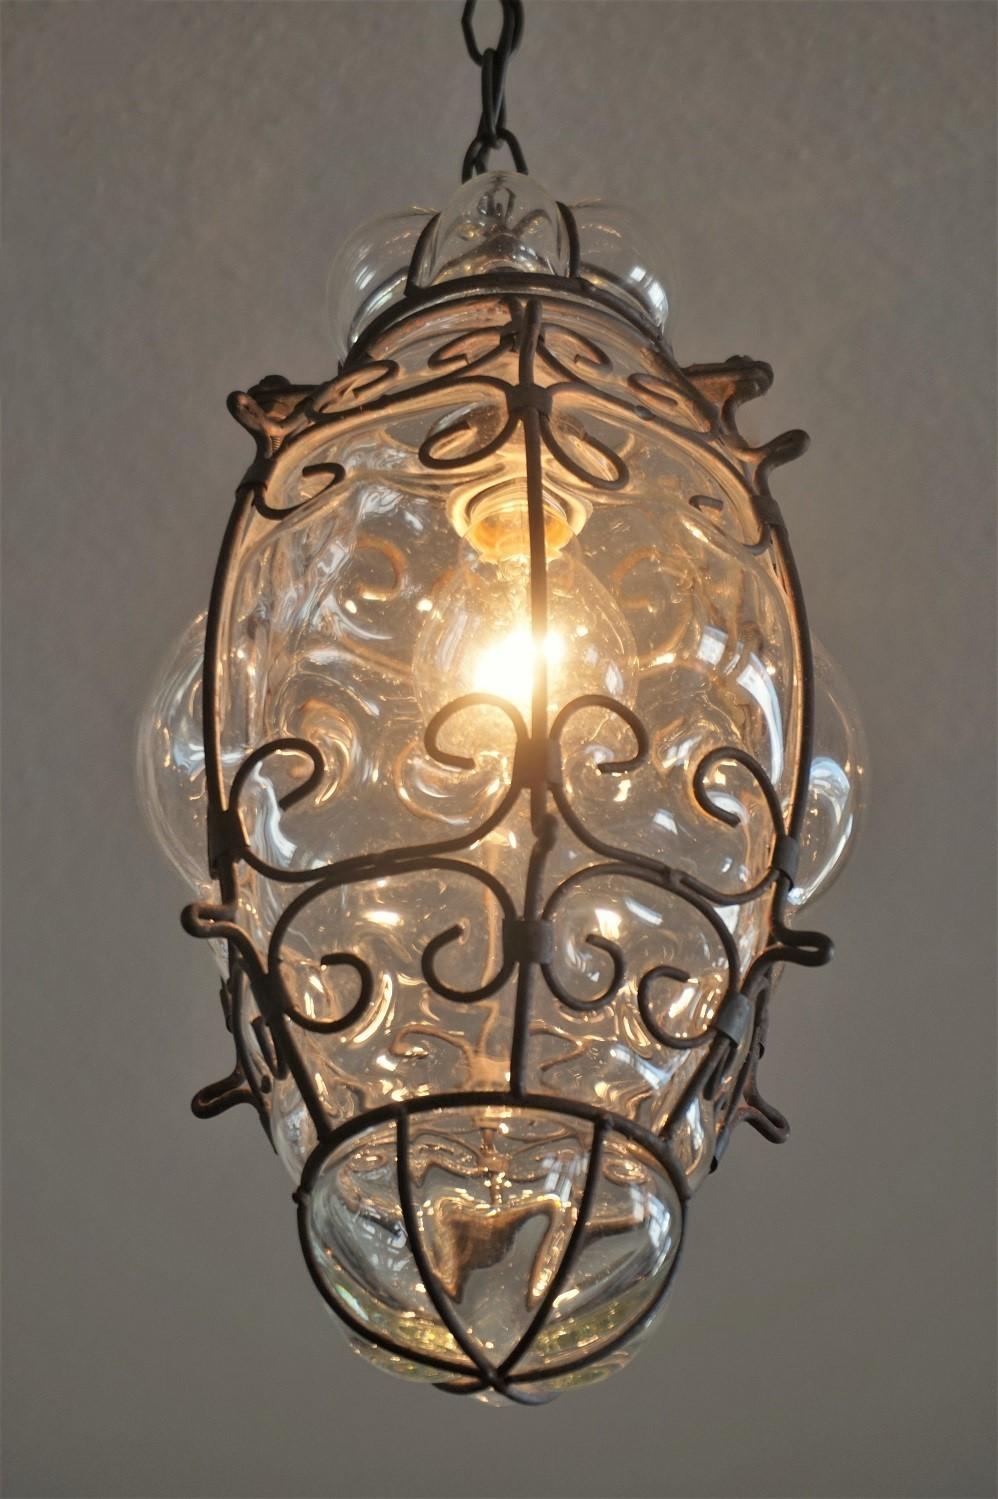 Mid-20th Century Murano Hand Blown Glass in Wrought Iron Frame Pendant or Lantern, Venice, Italy